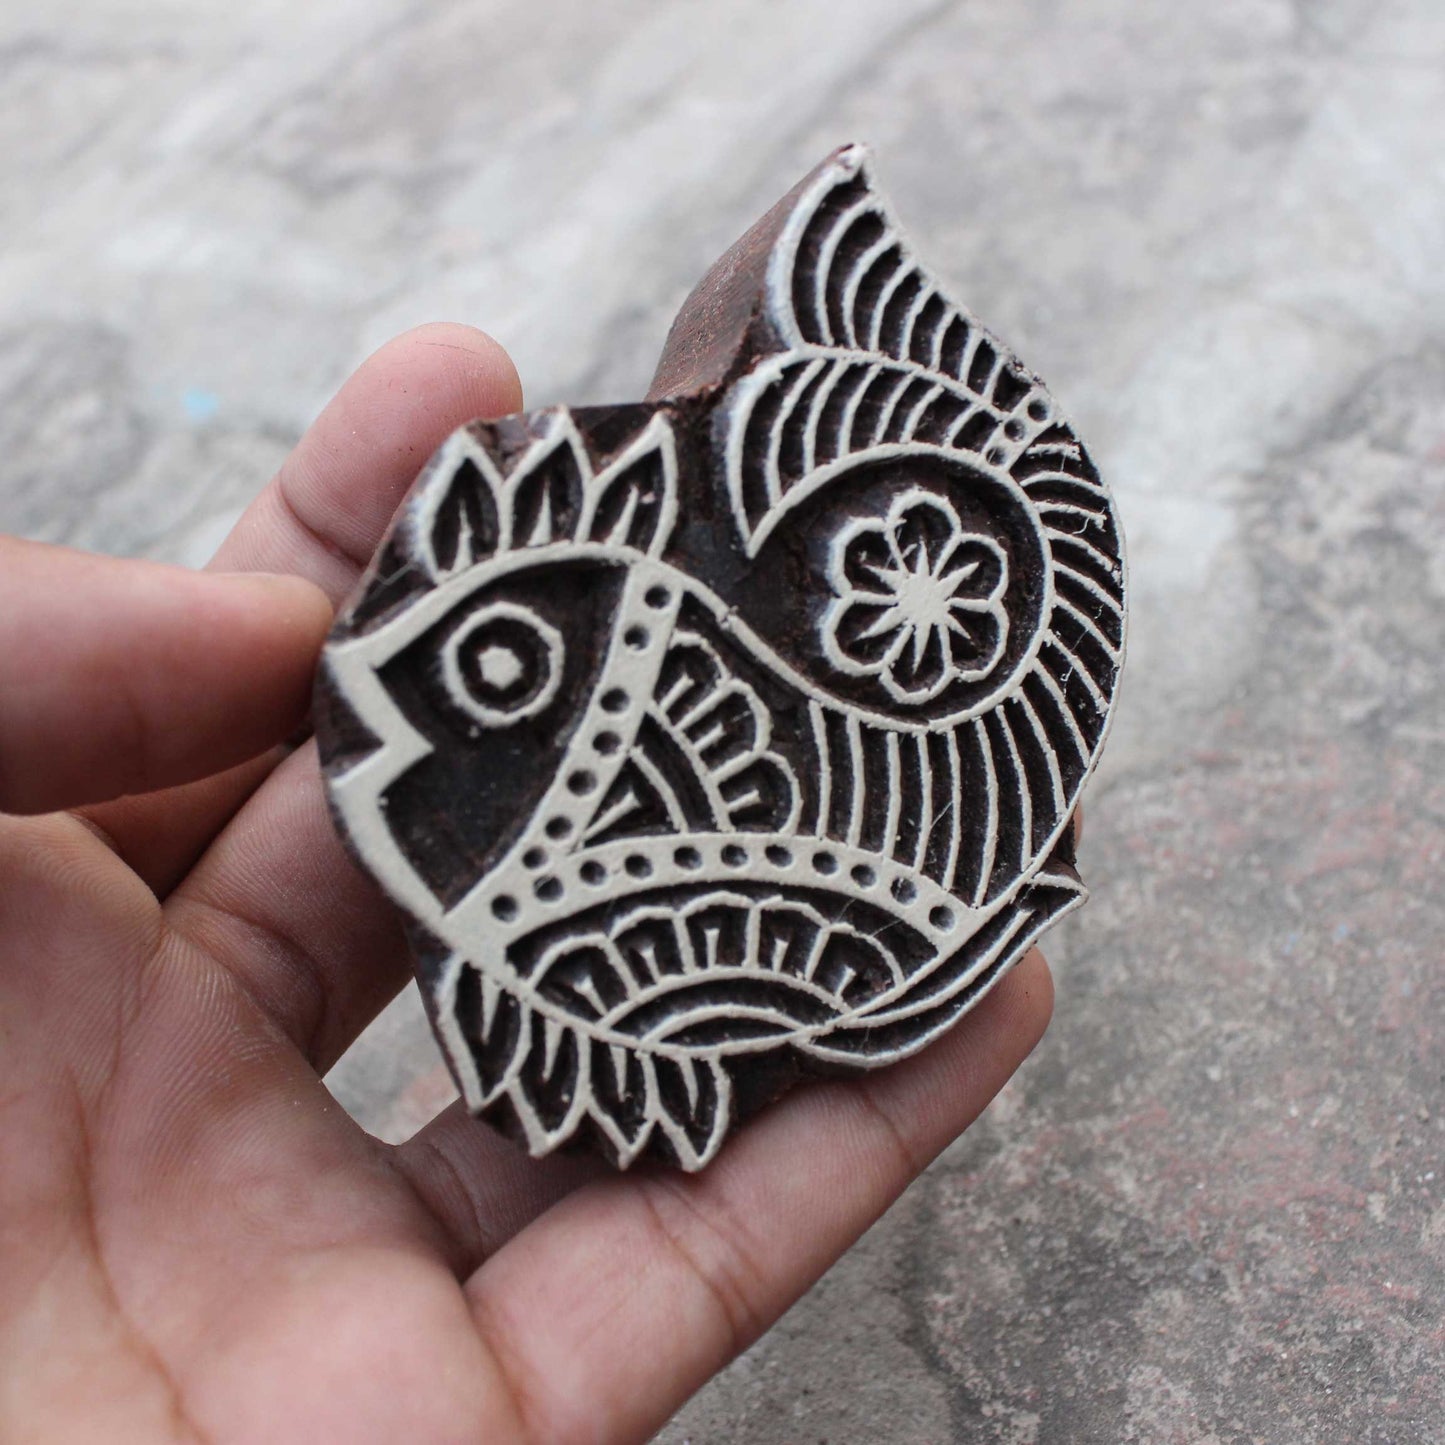 Fish Stamp Aquatic Fabric Stamp Indian Fabric Stamp Hand Carved Wooden Stamp For Printing Sea Soap Stamp Kids Craft Wooden Printing Block